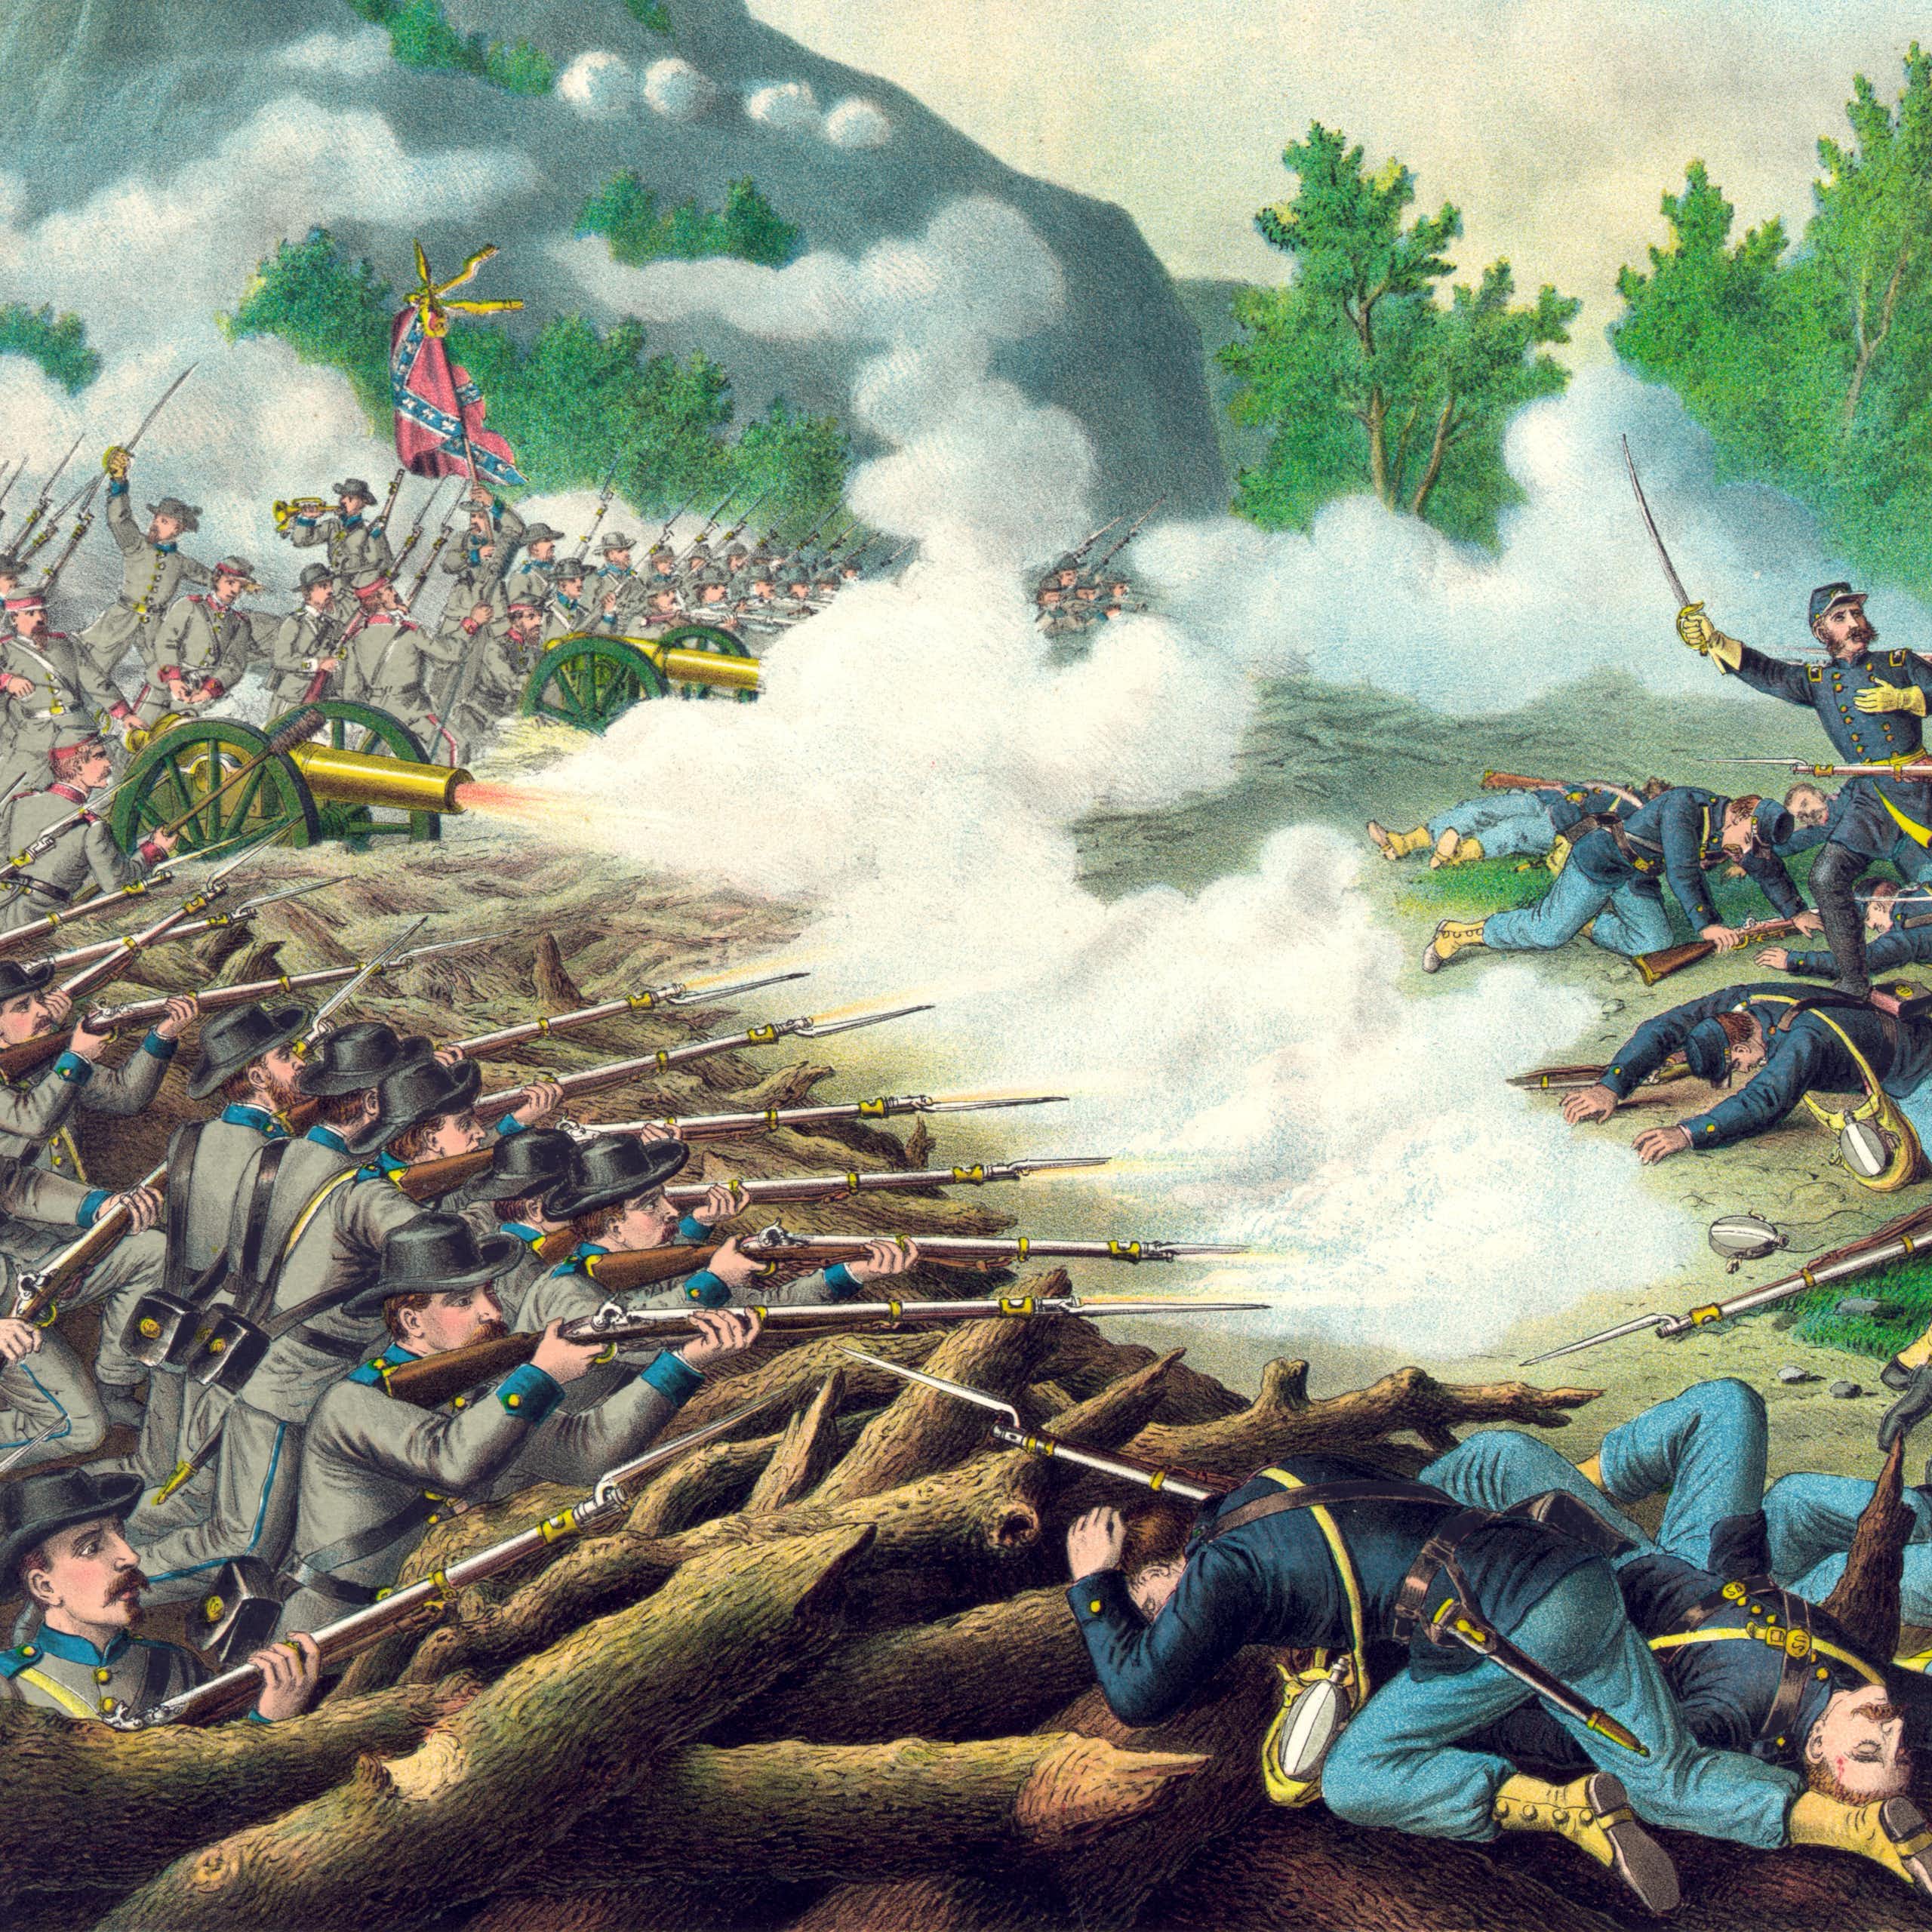 An illustration depicting a Civil War battle, with soldiers firing arms in the foreground and trees and greenery in the background.